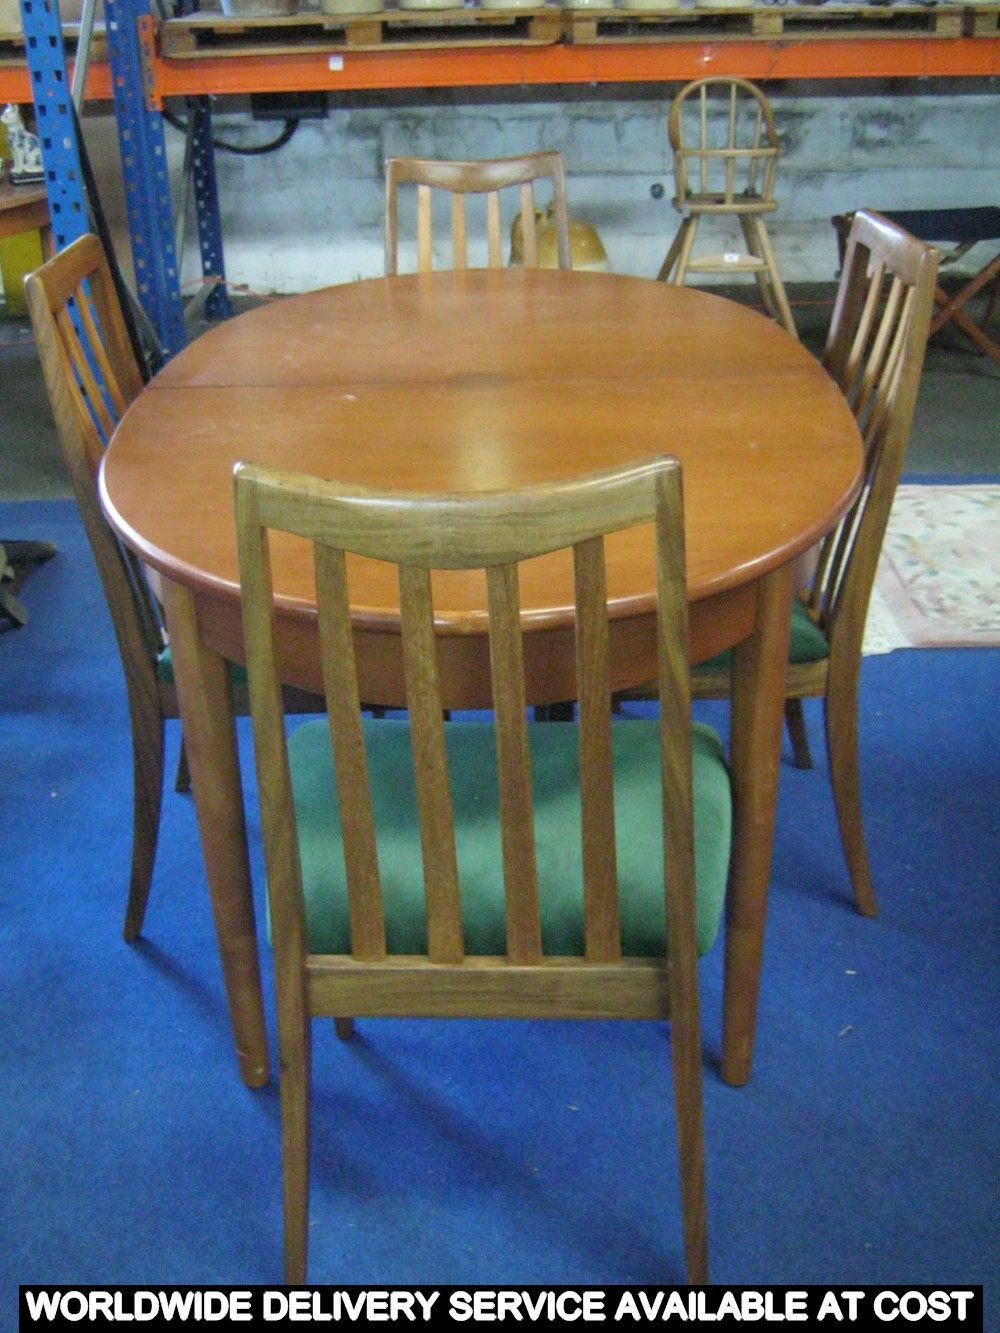 Four G-plan dining chairs with a similar table